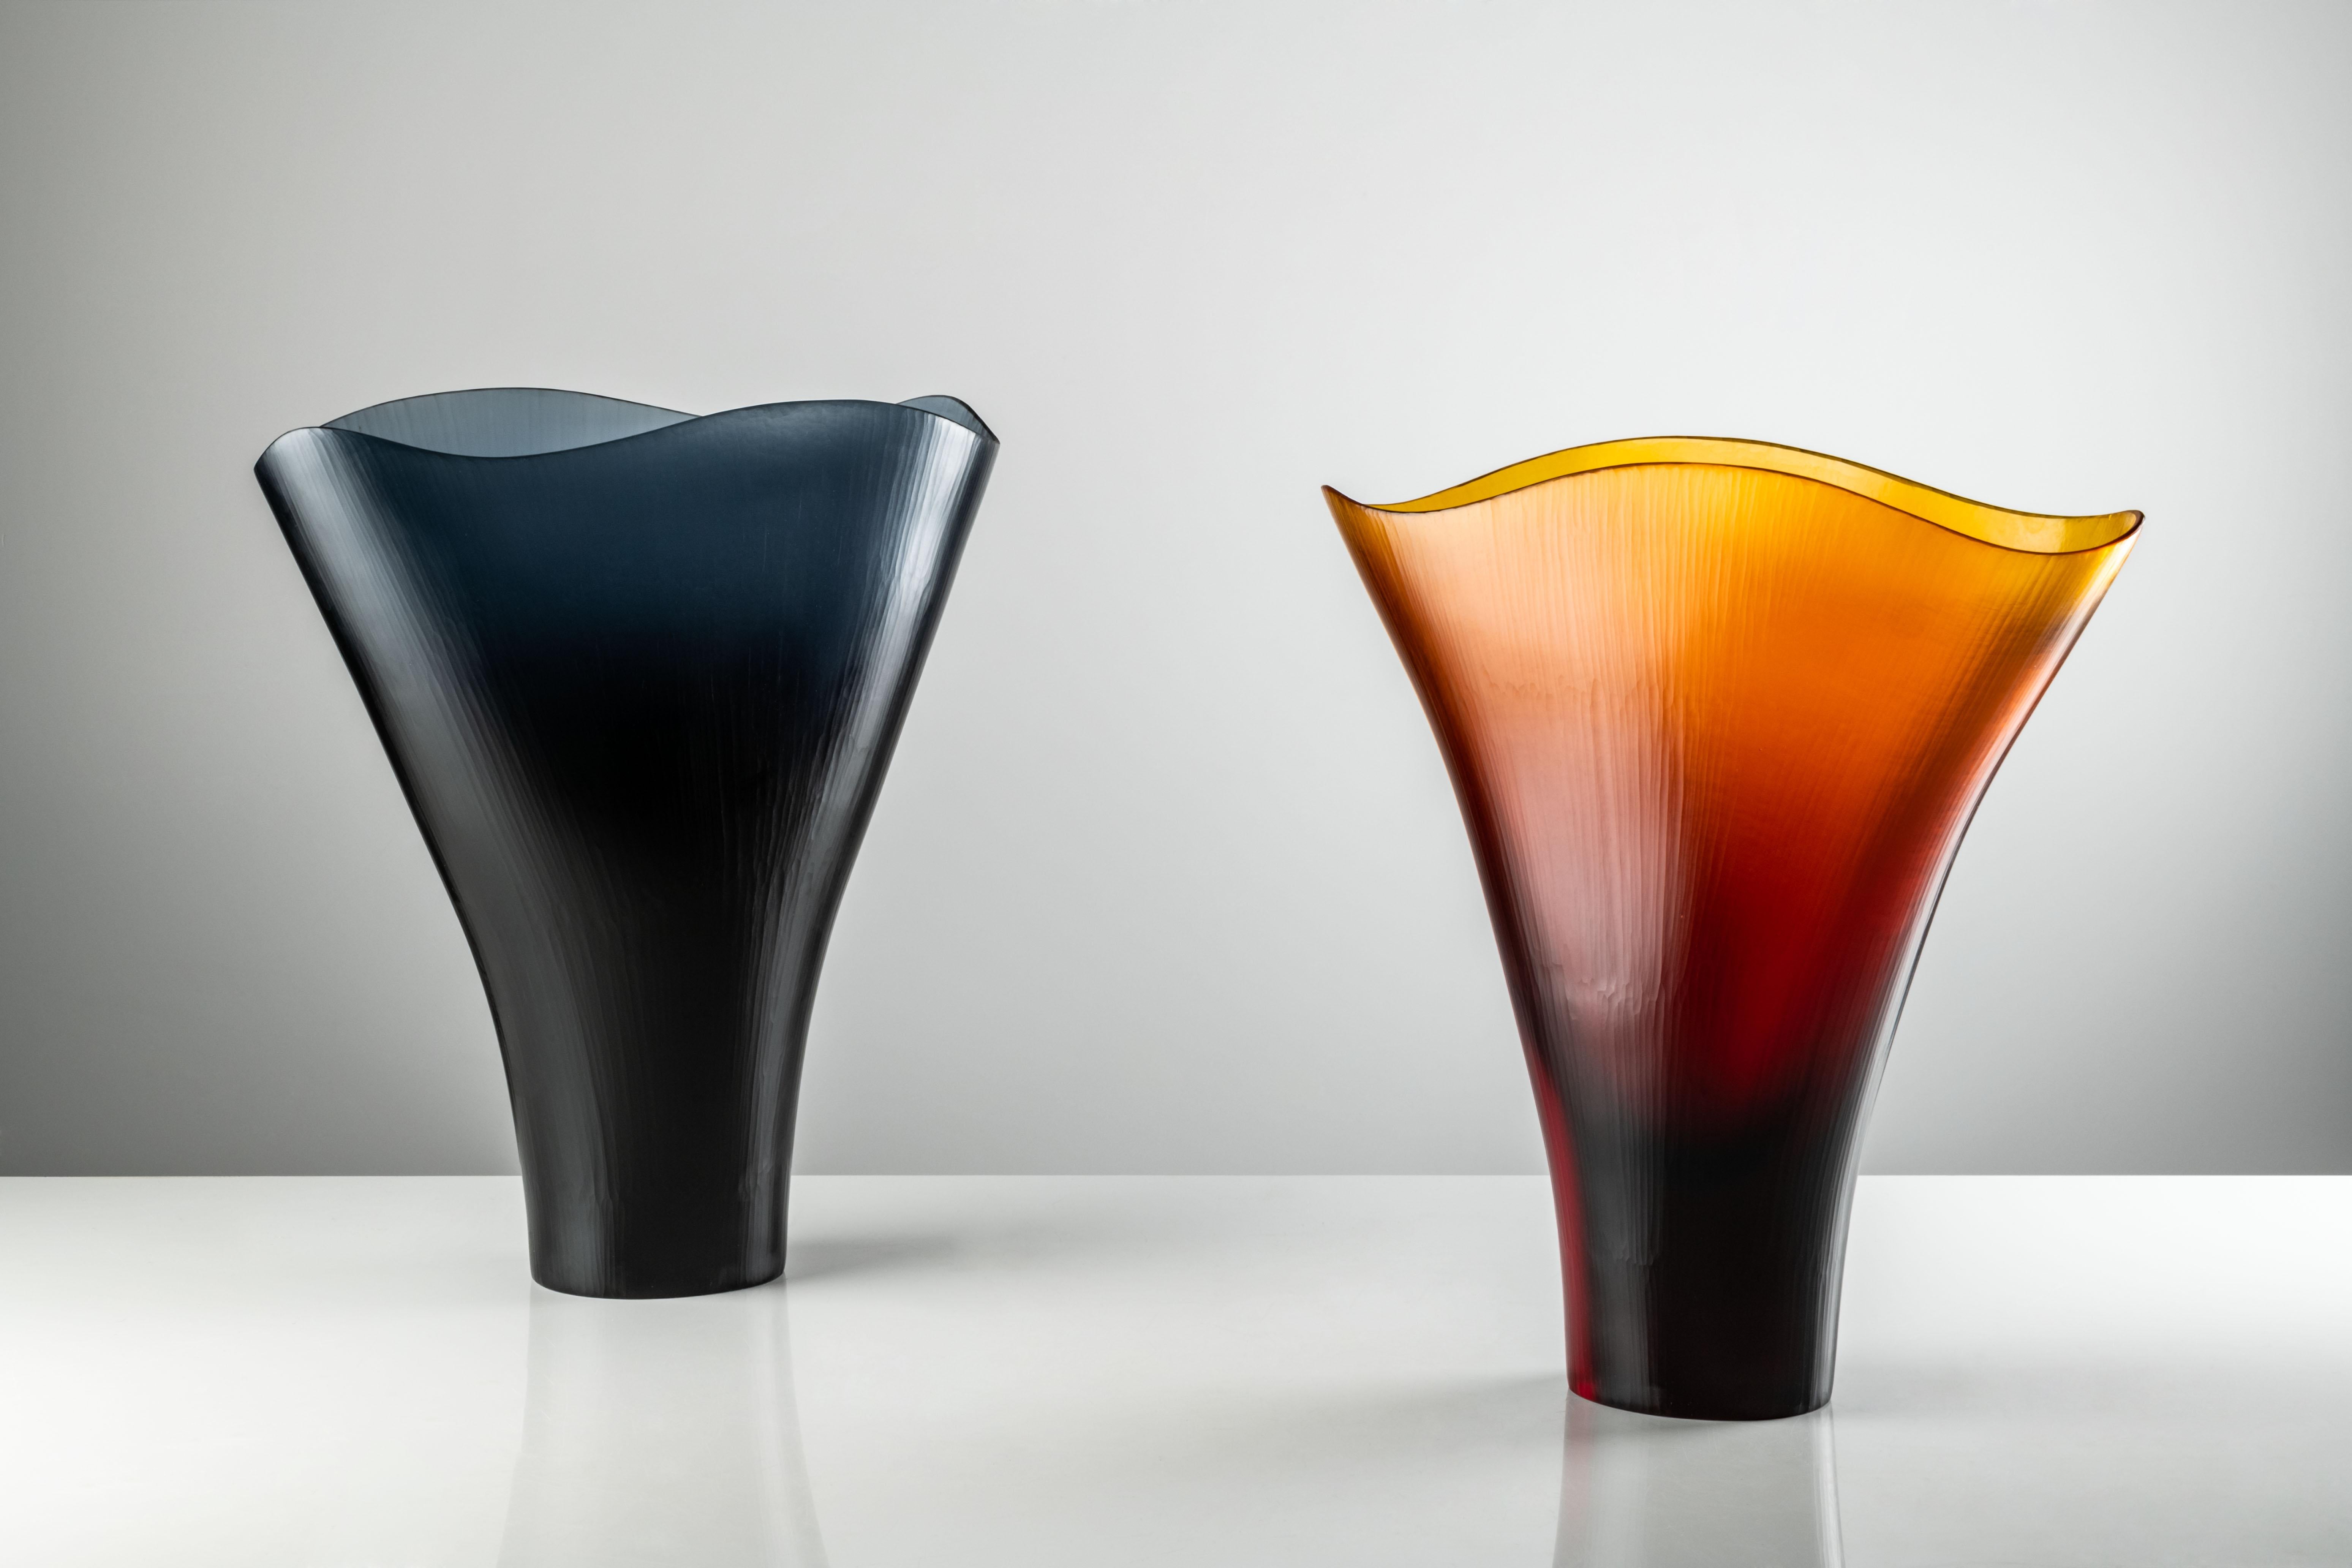 Battuti vase in grape Murano glass by Tobia Scarpa and Ludovico Diaz De Santillana for Venini. It evokes a lily standing tall, in tones of Grape and Amber. Its translucent appearance is the result of the skill and hard work of the master